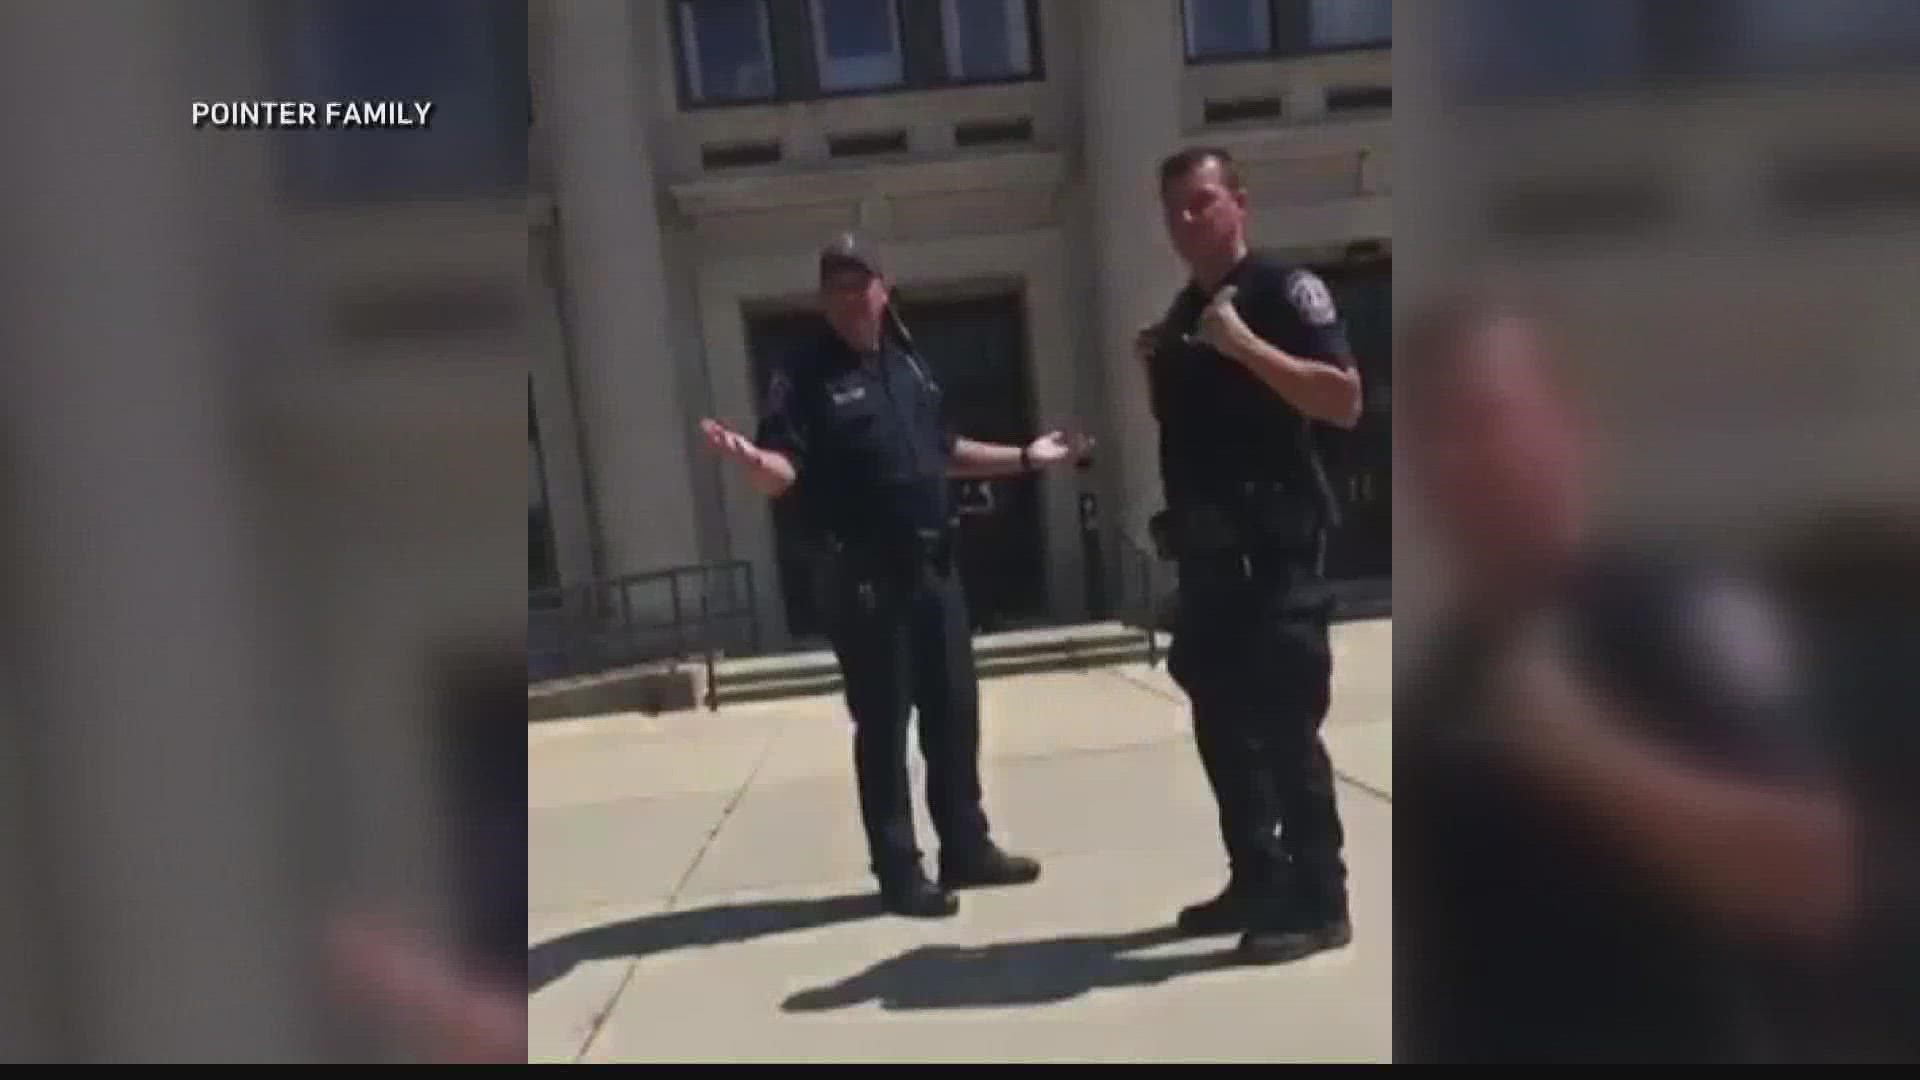 An IMPD officer has been found guilty of several charges after getting caught on camera punching a high school student.